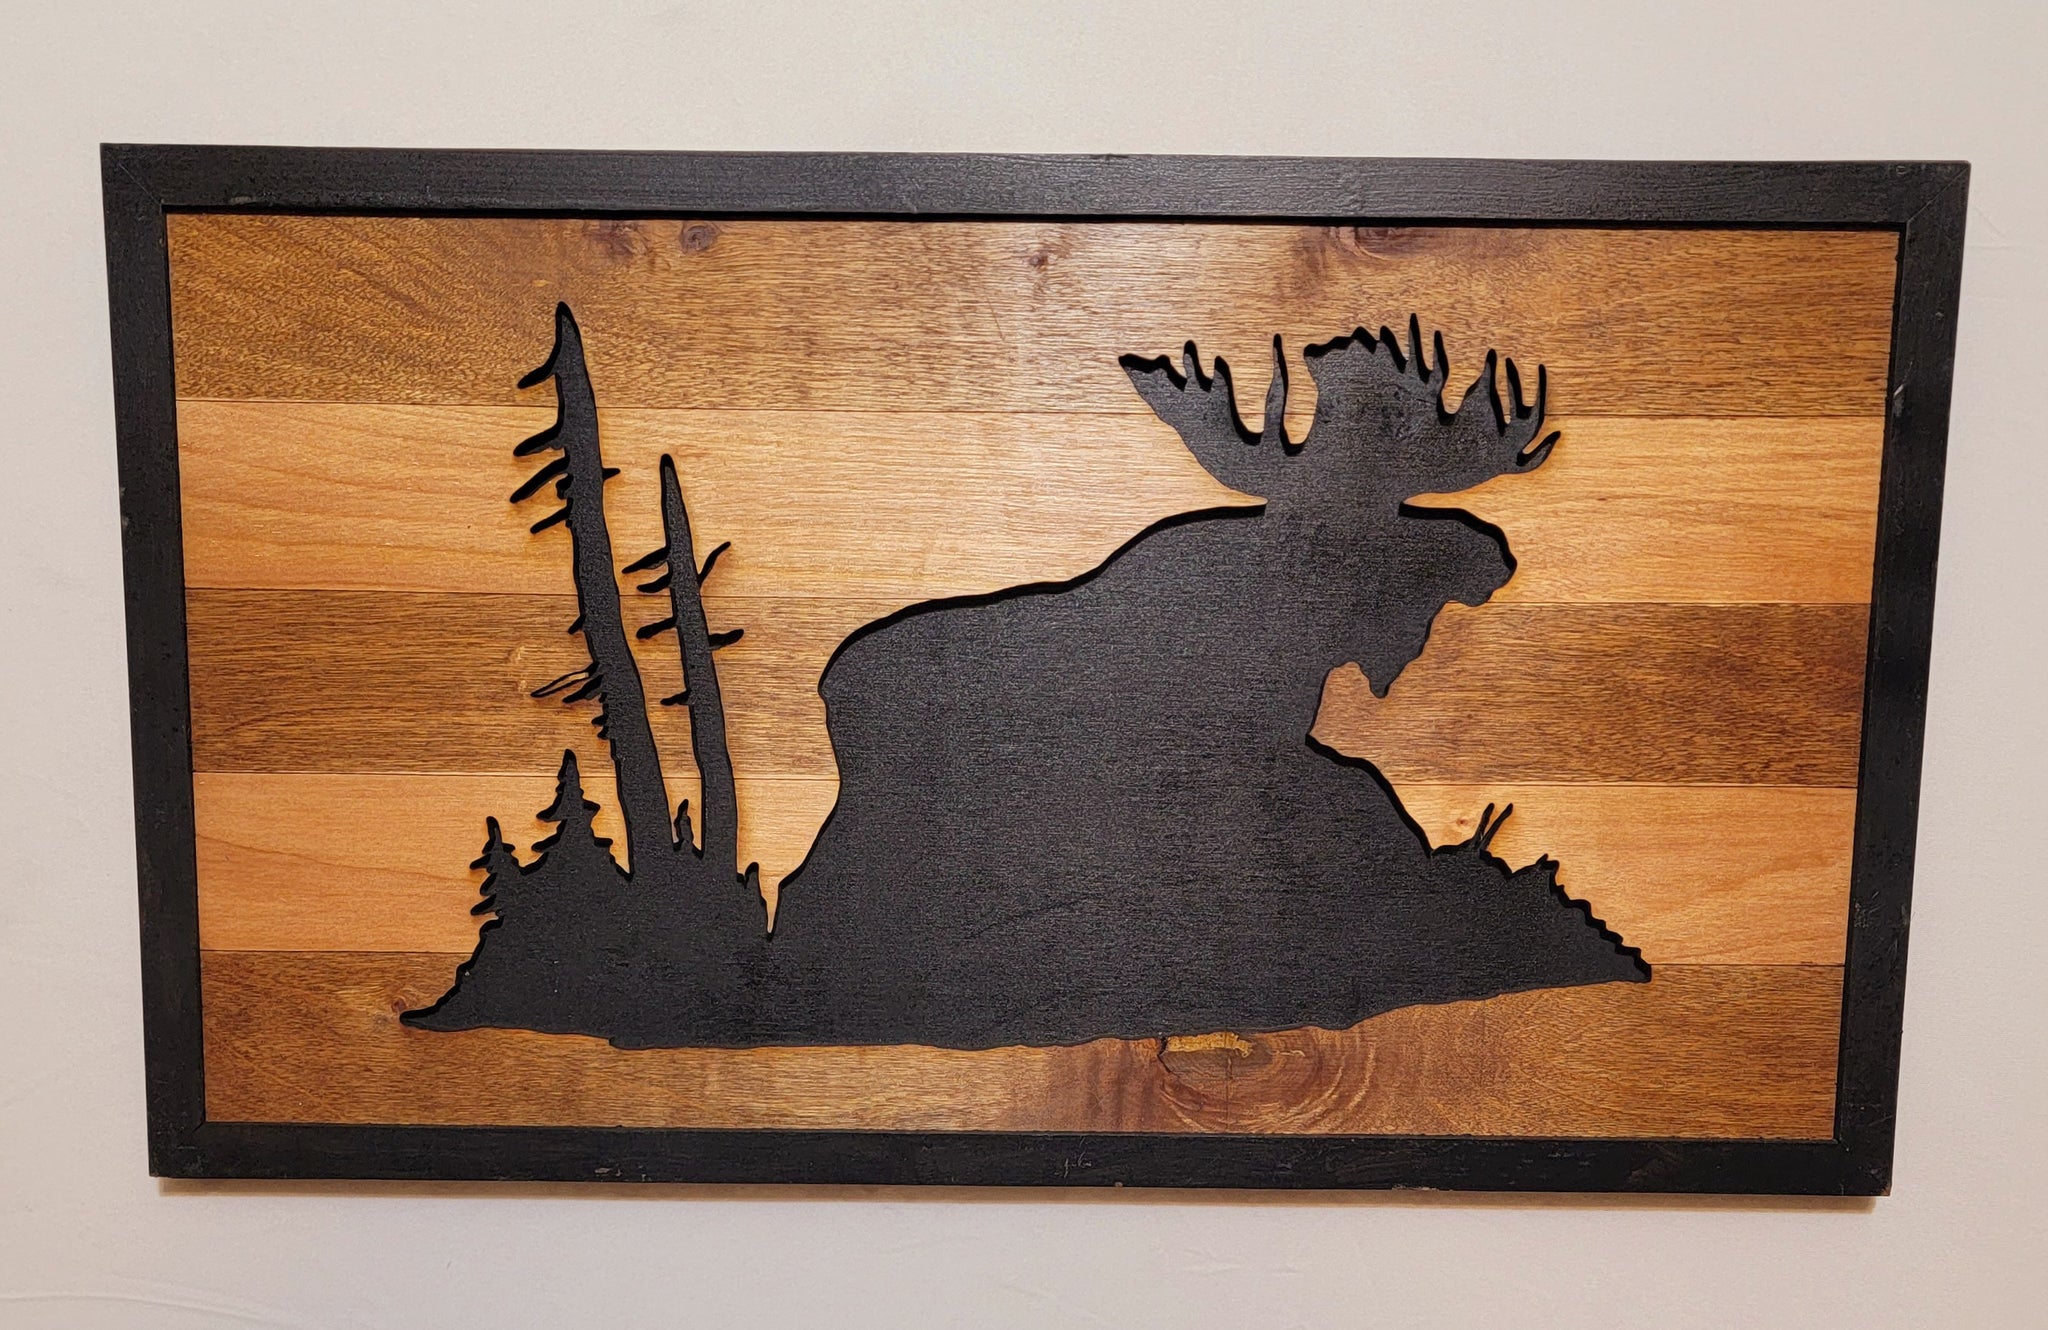 3D Laser Cut Layered Cut Scene With Moose - Home Decor - Gift - Northland - 18.5x10.5